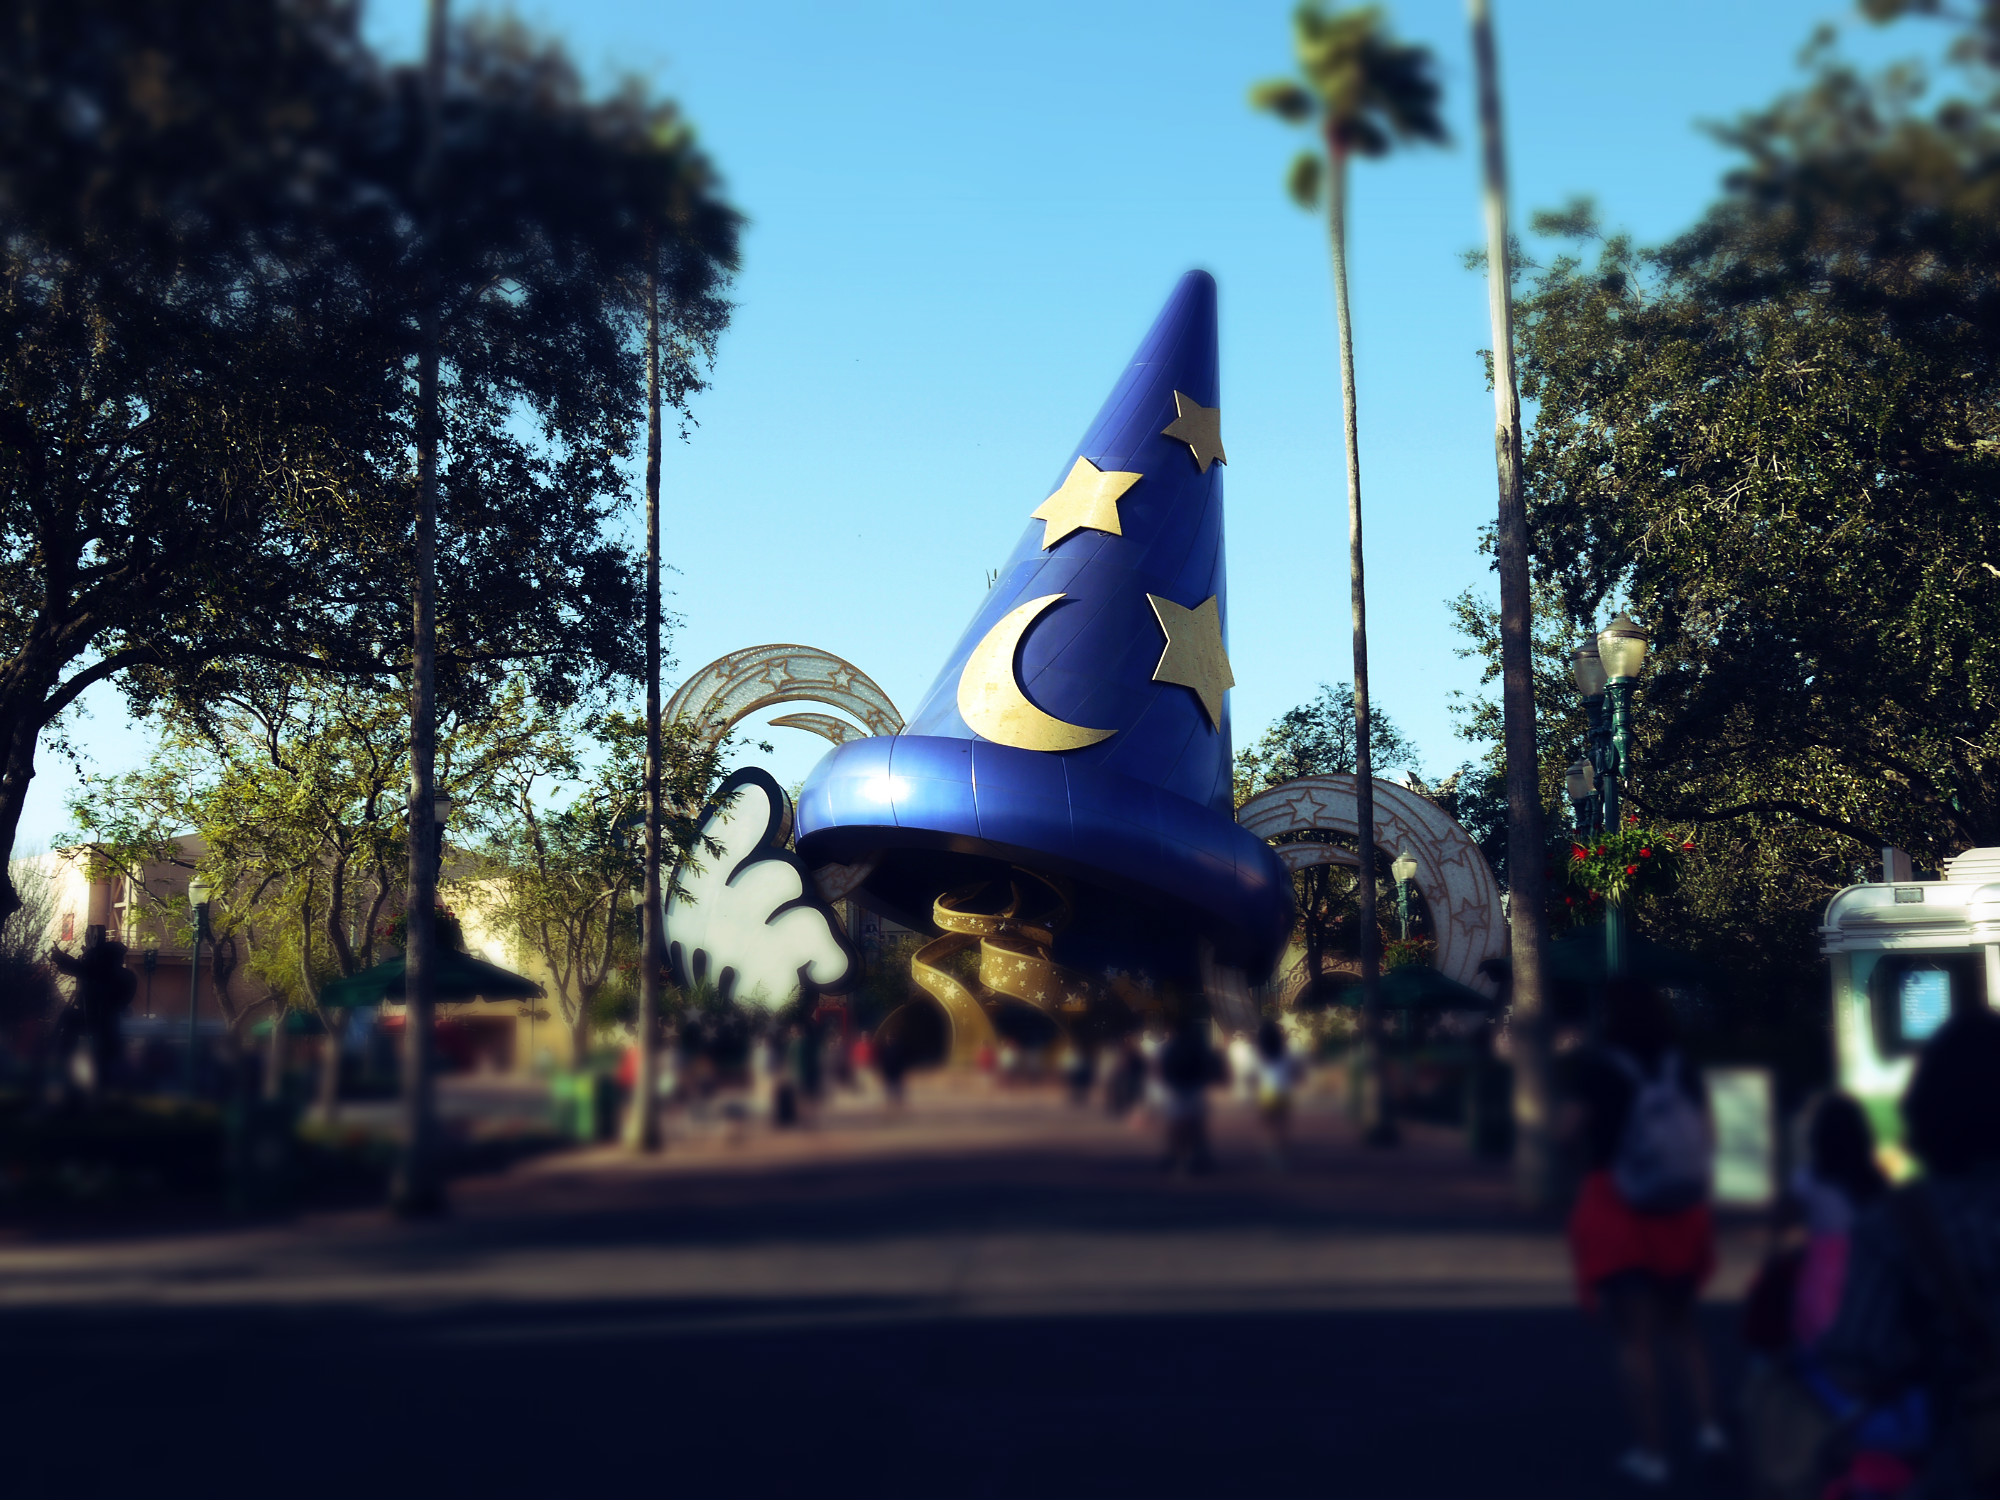 Sorcerer Mickey Hat Removal to begin on January 7th